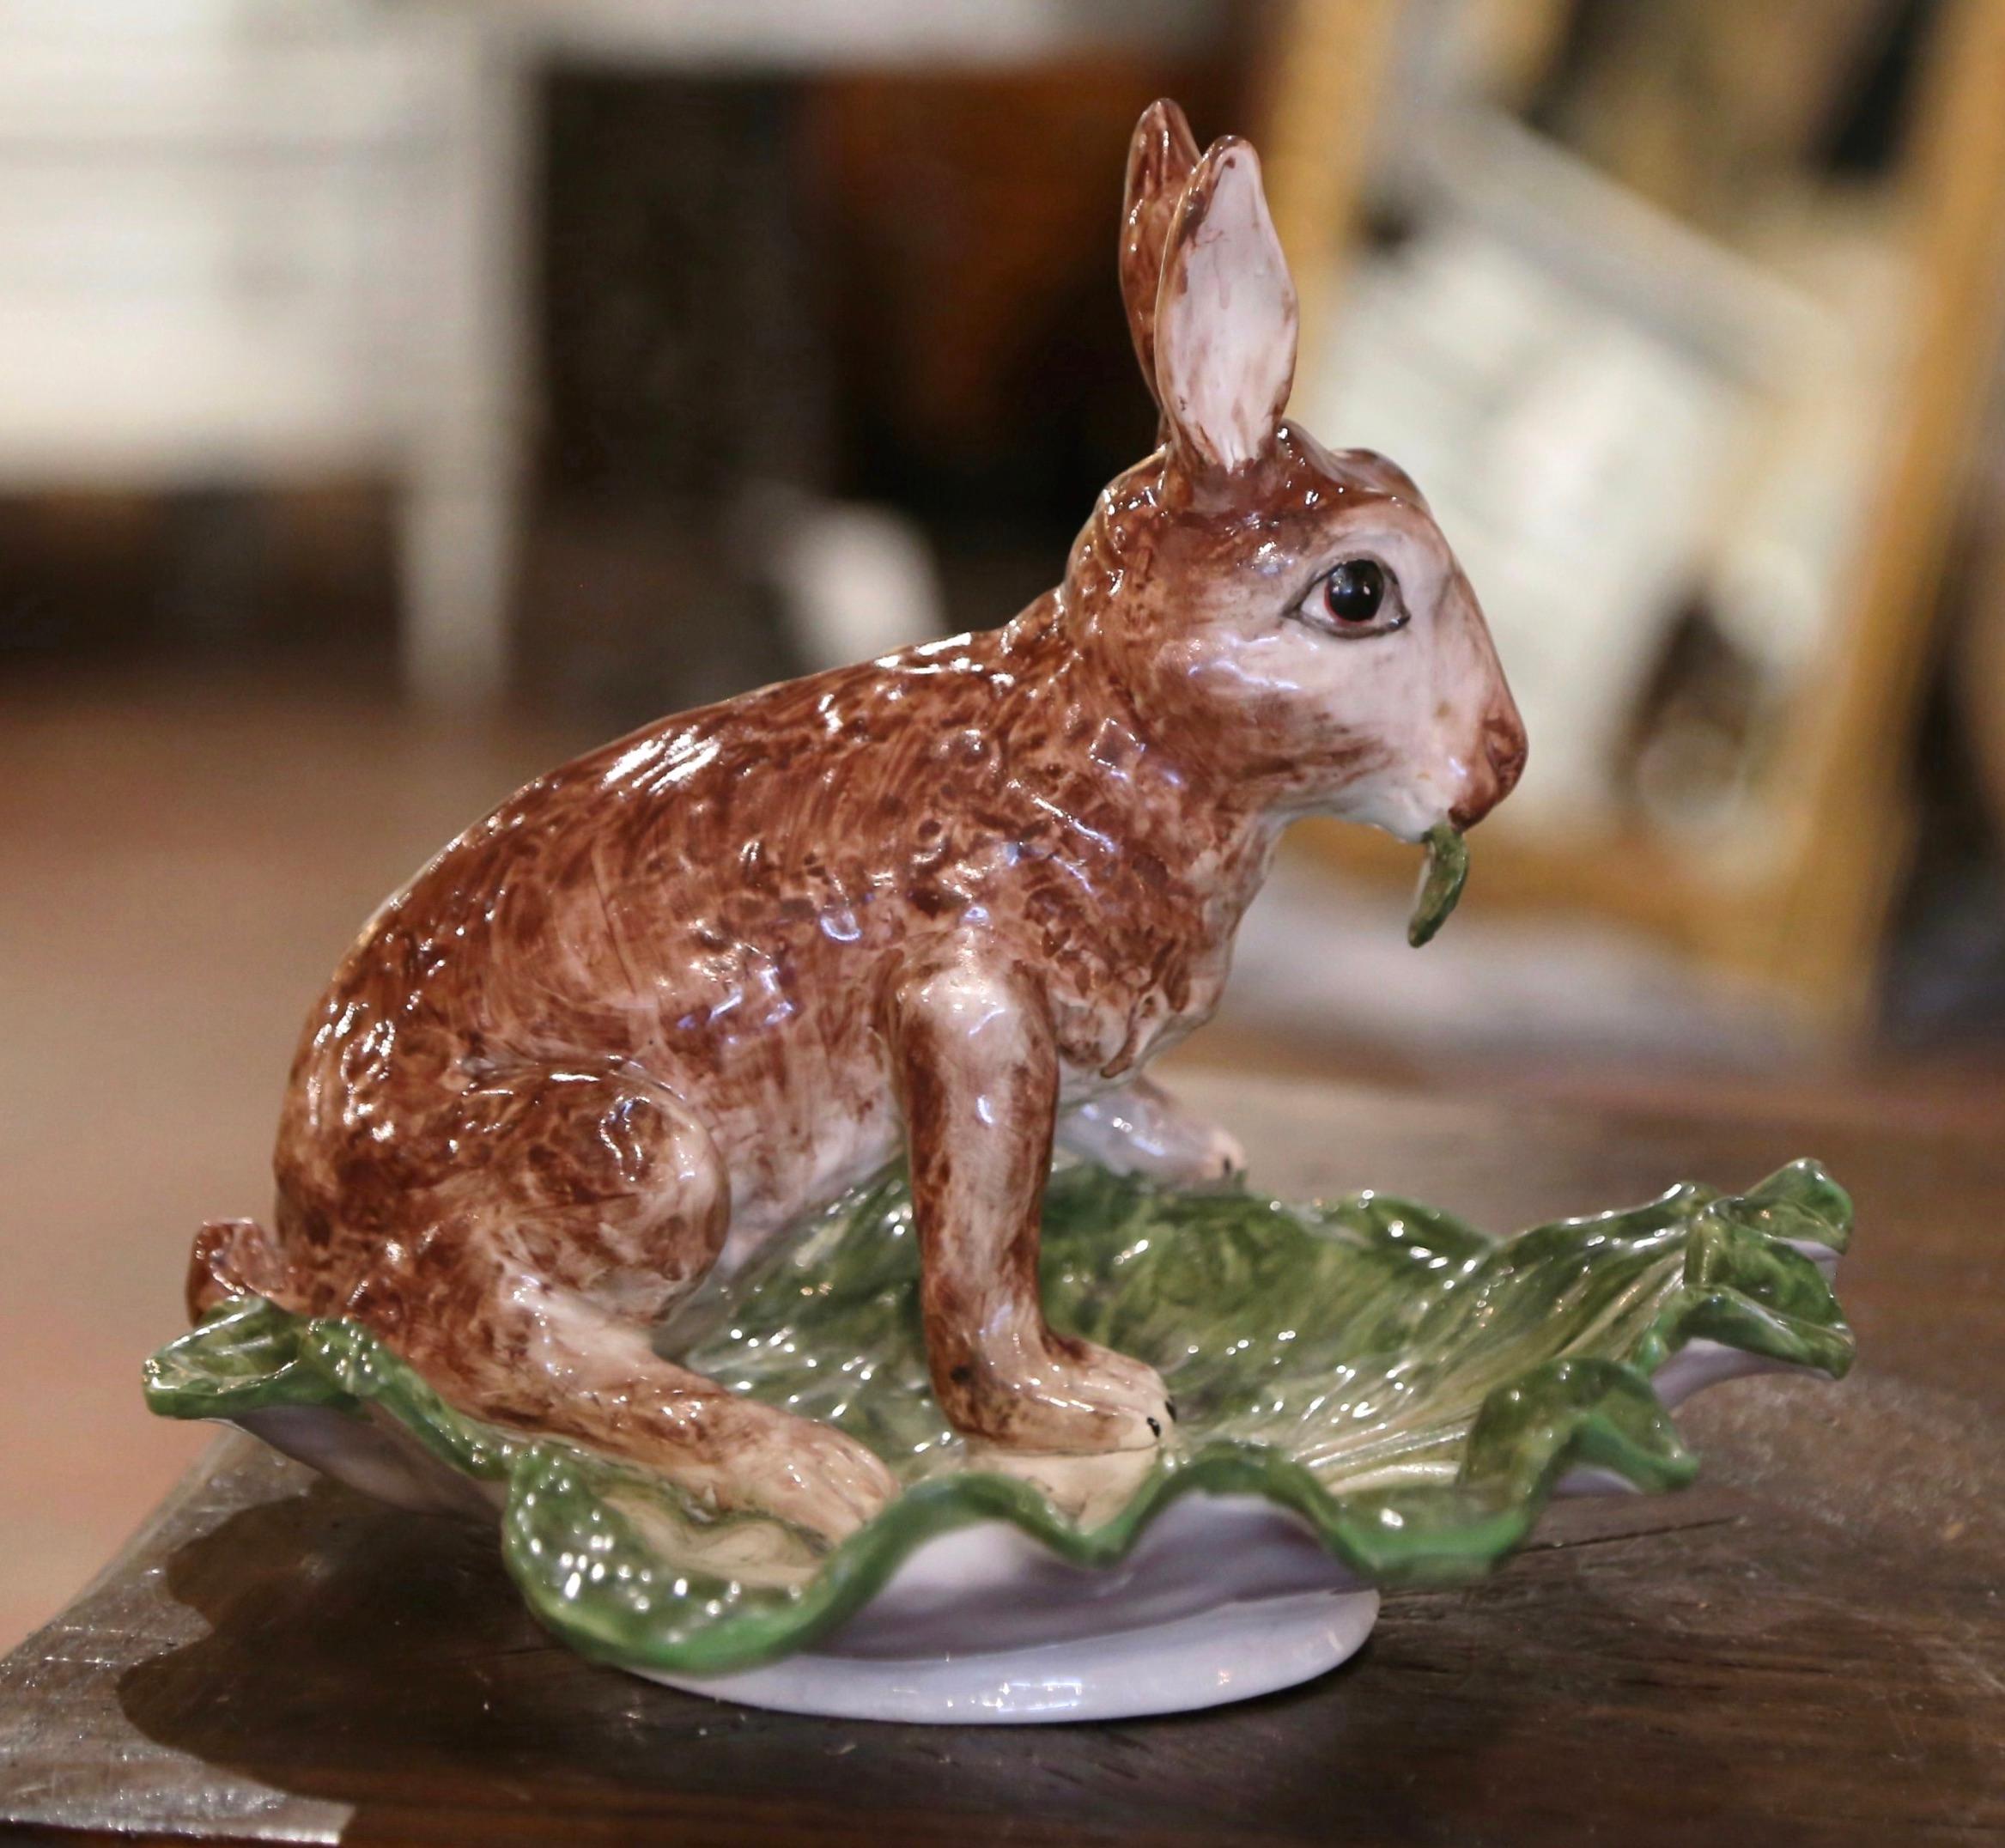 Decorate a table or console with this colorful vide-poche dish. Created in Italy circa 1970, this elegant dish shaped as a large leaf with scalloped edges, features a cheerful rabbit sited on its back legs and eating. The decorative platter is in